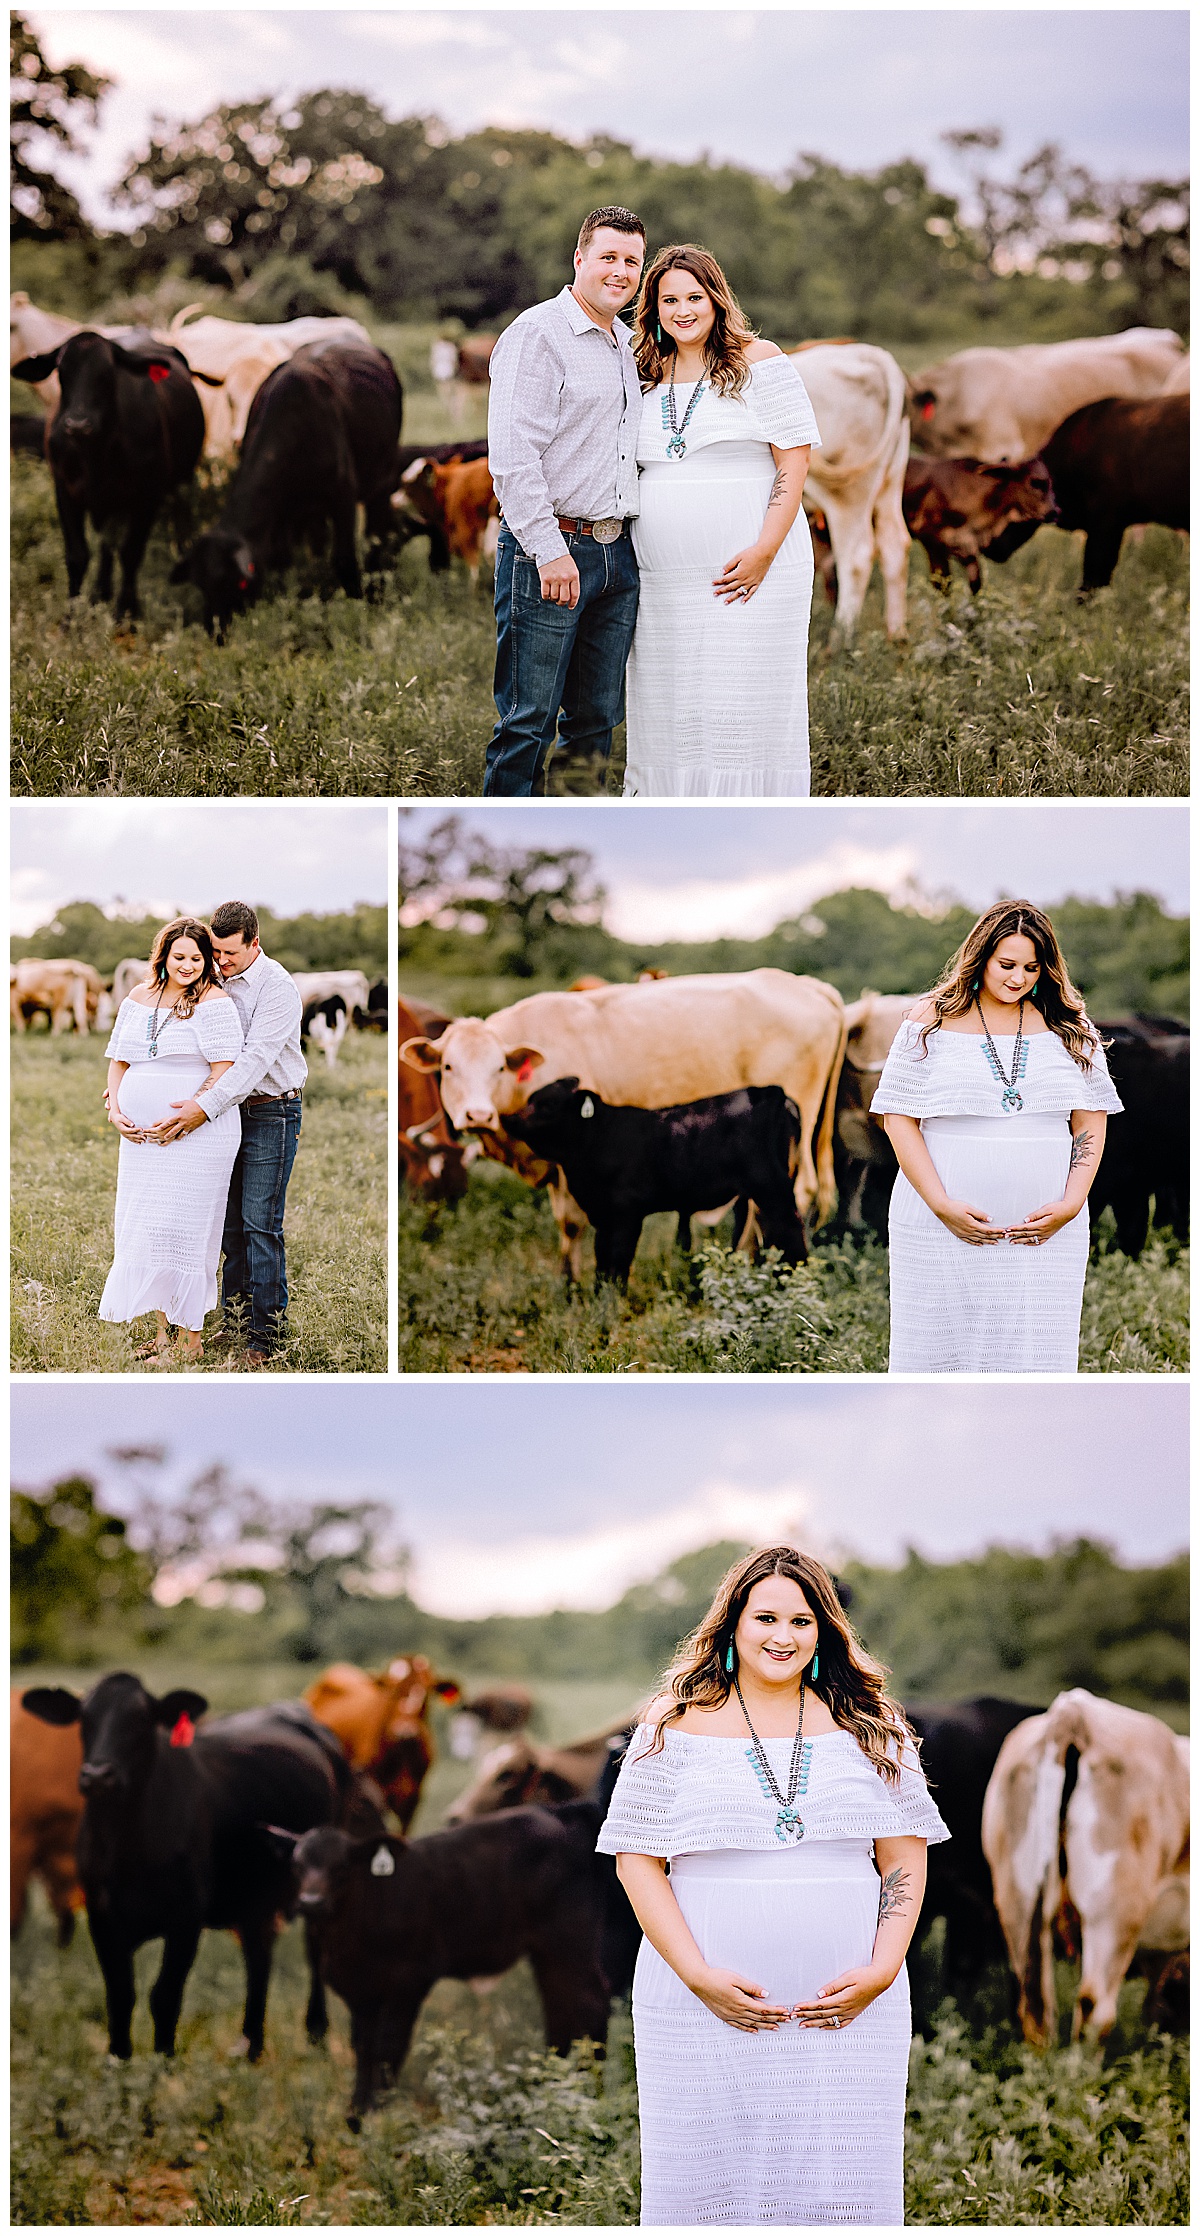 Rustic-Maternity-Session-Texas-Sunset-Carly-Barton-Photography_0072.jpg